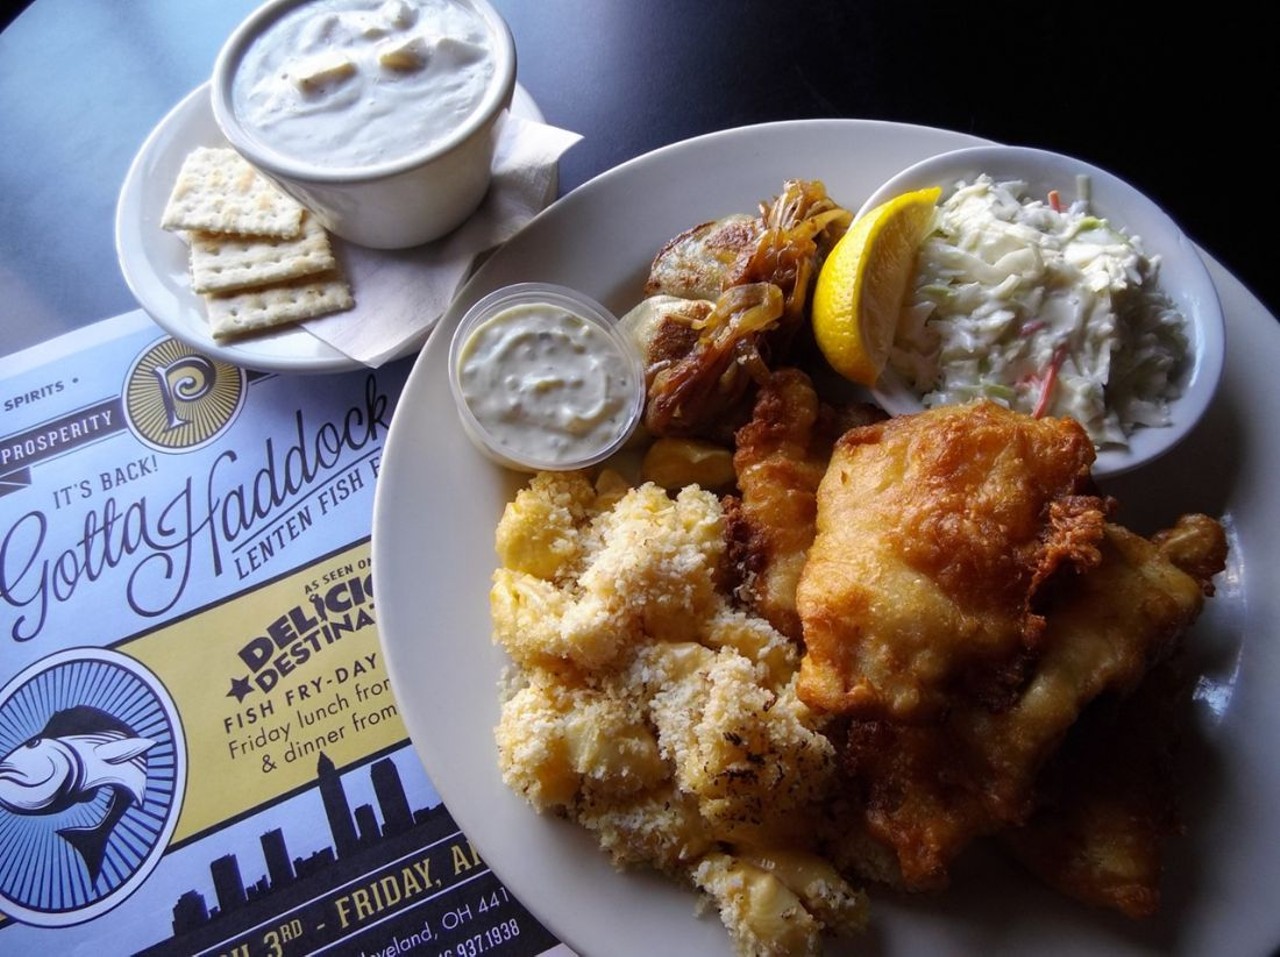 Fish Fry Days
Fri, March 3
Prosperity Social Club, 1109 Starkweather Ave.. 216-937-1938
Through the month of March and for the first few weeks of April, Prosperity Social Club hosts its fish fry, dubbed Fish Fry-Days, every Friday from 11 a.m. to 2 a.m. The special Lenten menu includes the Big Fish Fry, a seasonal staple that features a generous portion of haddock covered in a fluffy blanket of beer batter and complemented by homemade coleslaw, house tartar sauce and old-school-style mac and cheese. Last year, the event received national attention when the home-cooked Big Fish Fry was featured on TV chef Andrew Zimmern&#146;s Delicious Destinations. New this year: Chef Ed Kubitz has added a lemony shrimp piccata pasta to the list of Fish Fry-Day offerings. (Niesel)
Photo Provided